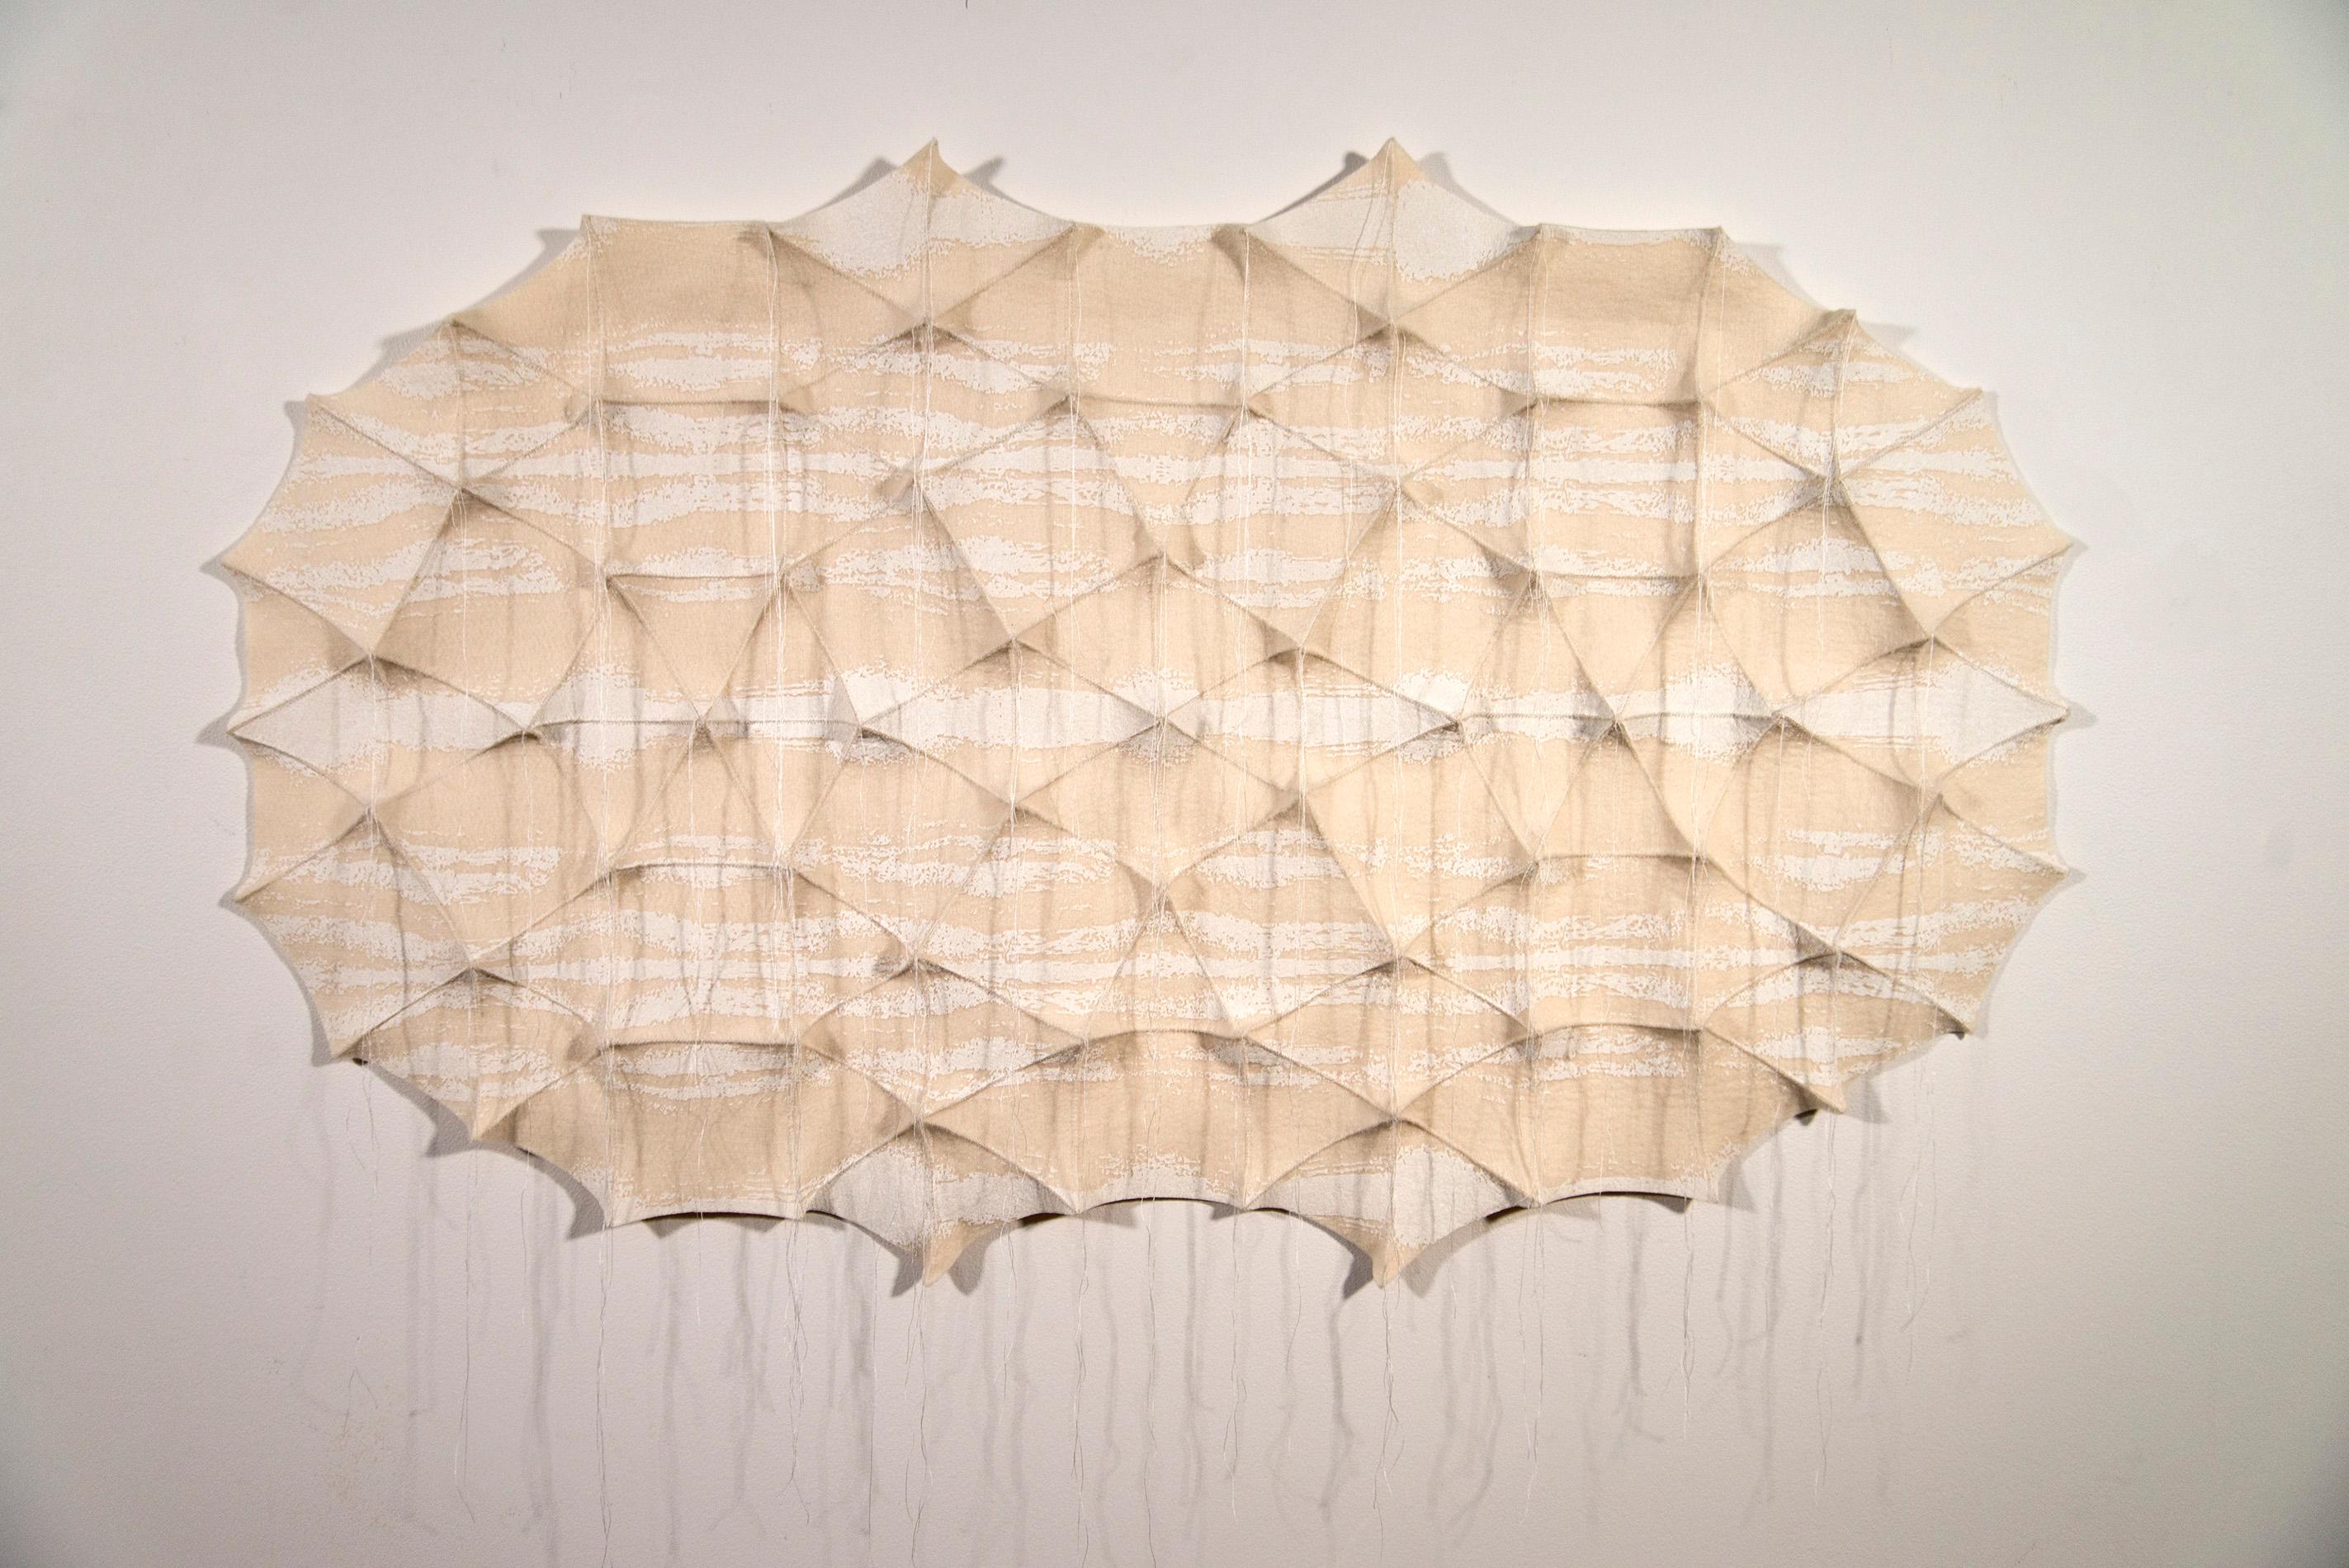 Semonemo 3 - white, pattern, wall hanging, 3D, felt, textile, tapestry - Mixed Media Art by Chung-Im Kim